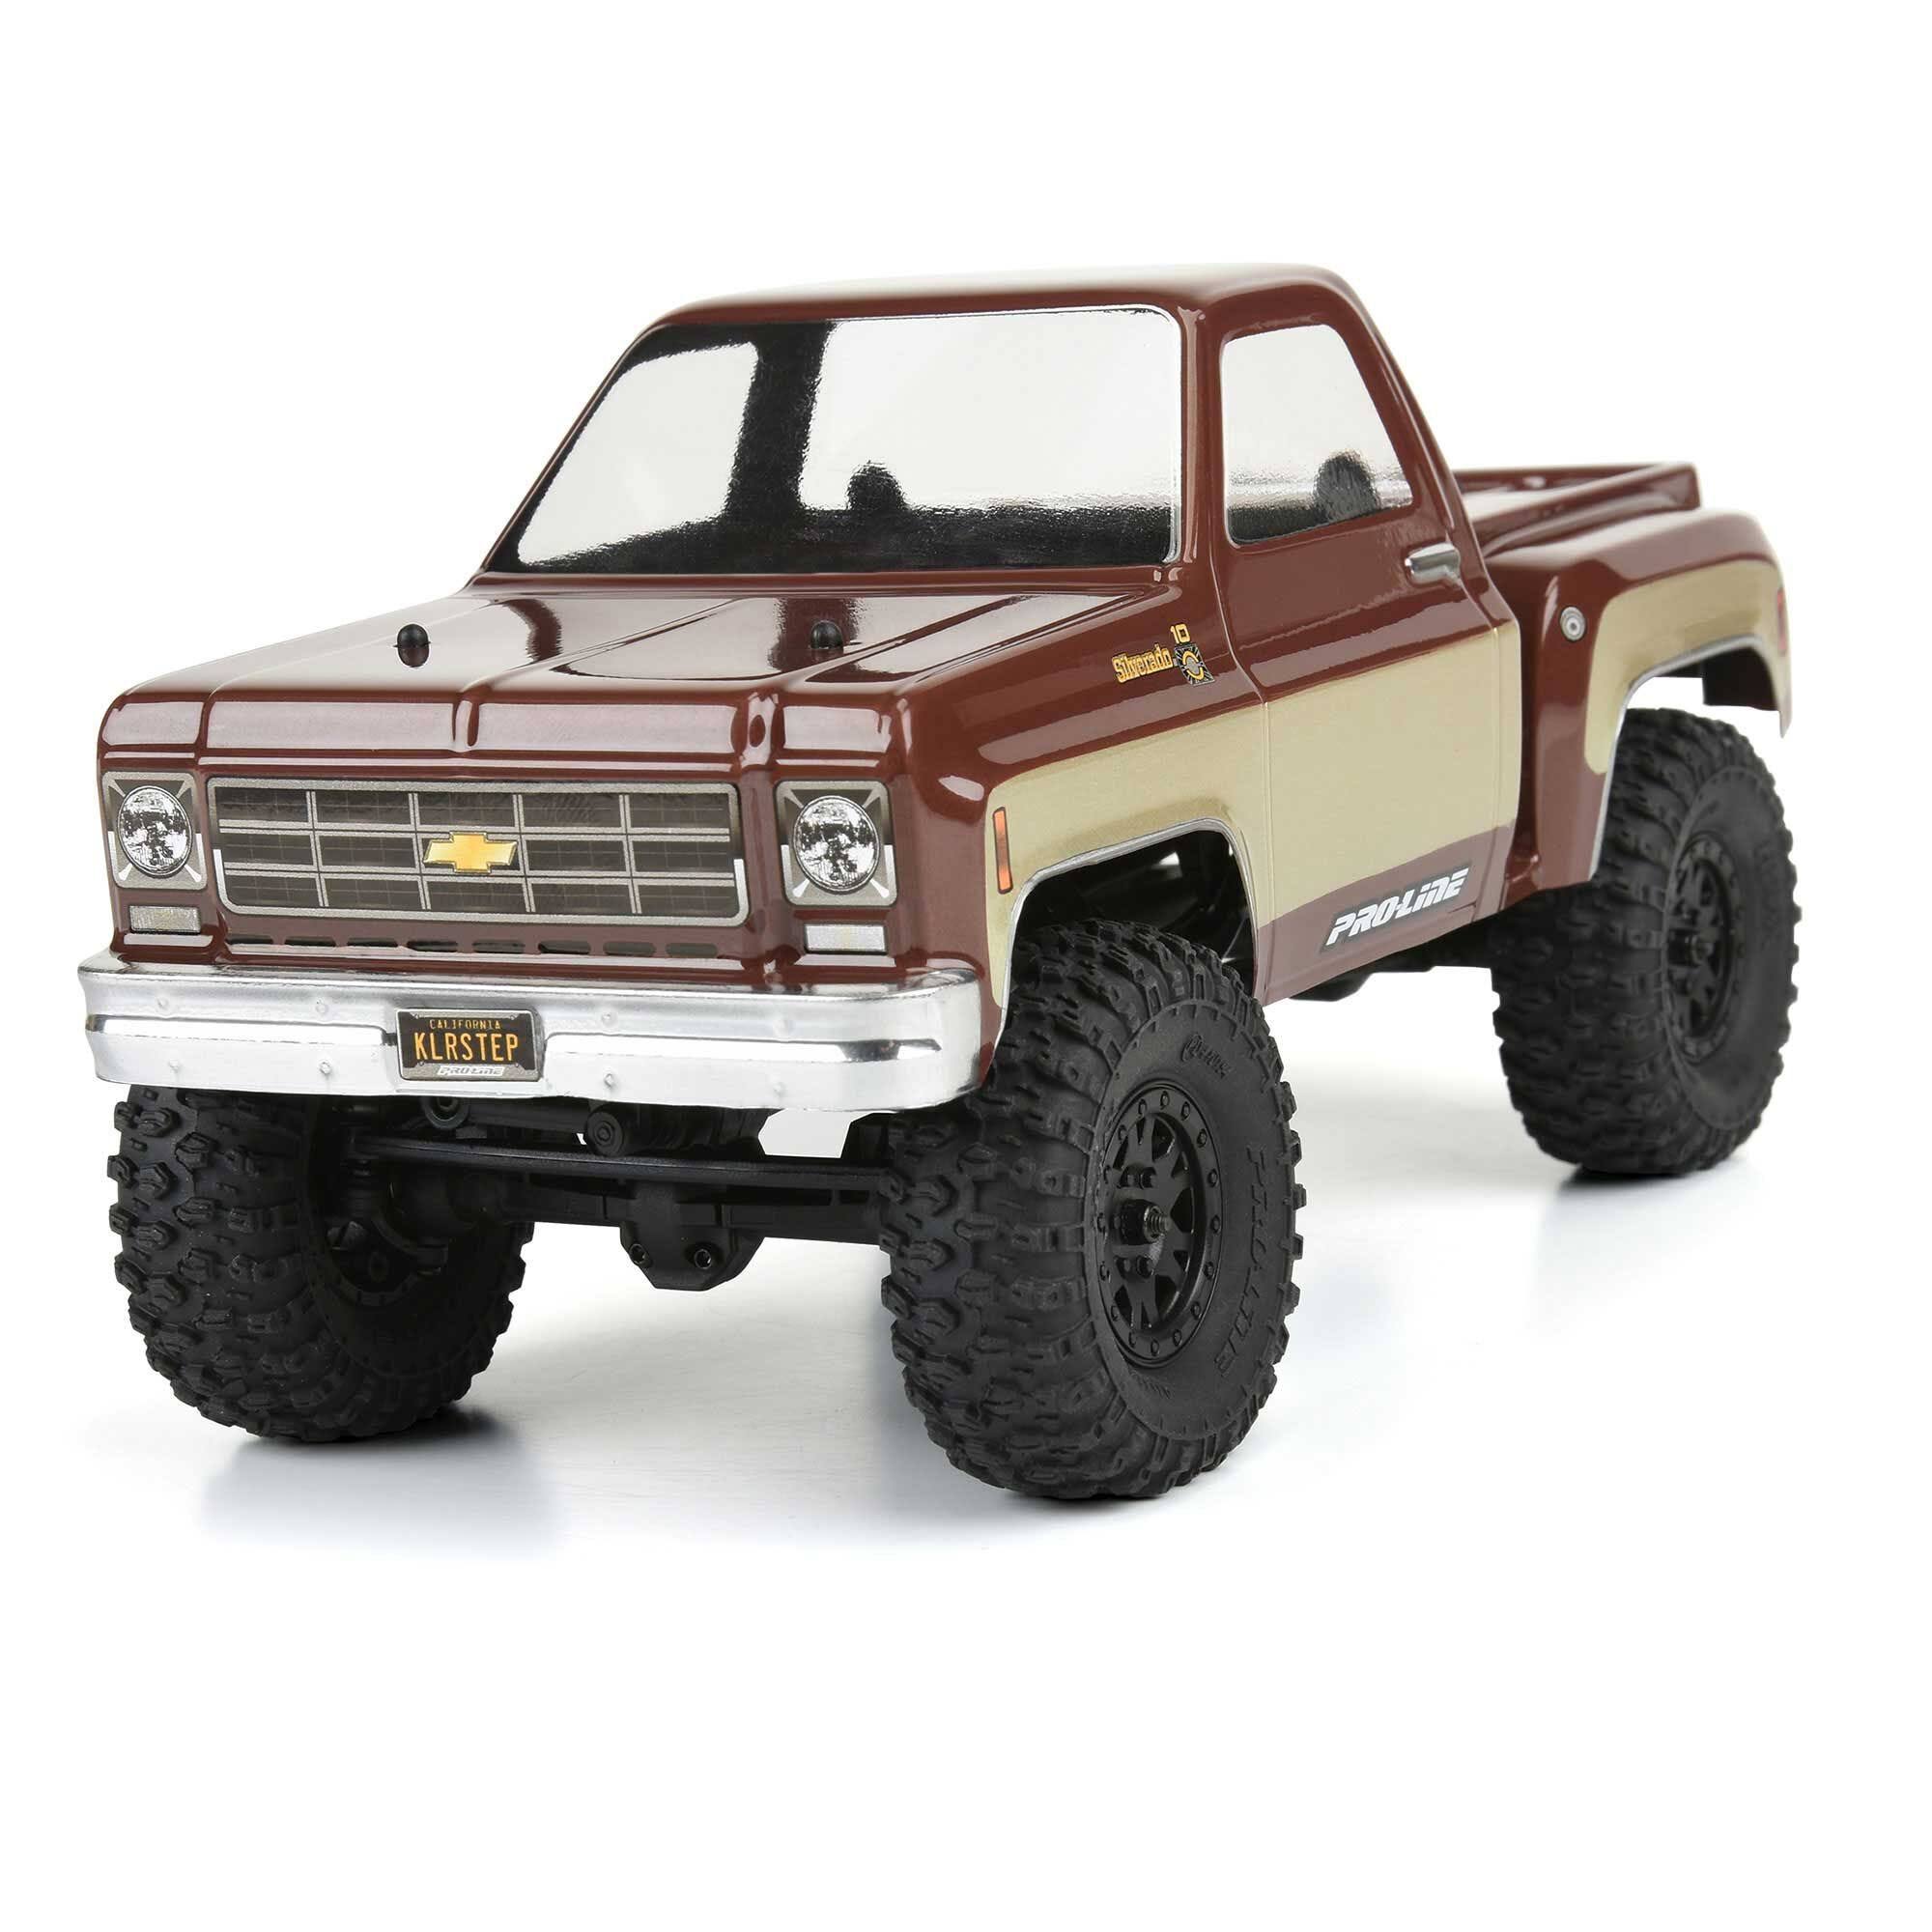 Proline 3583-00 1978 Chevy K-10 Clear Body for SCX24